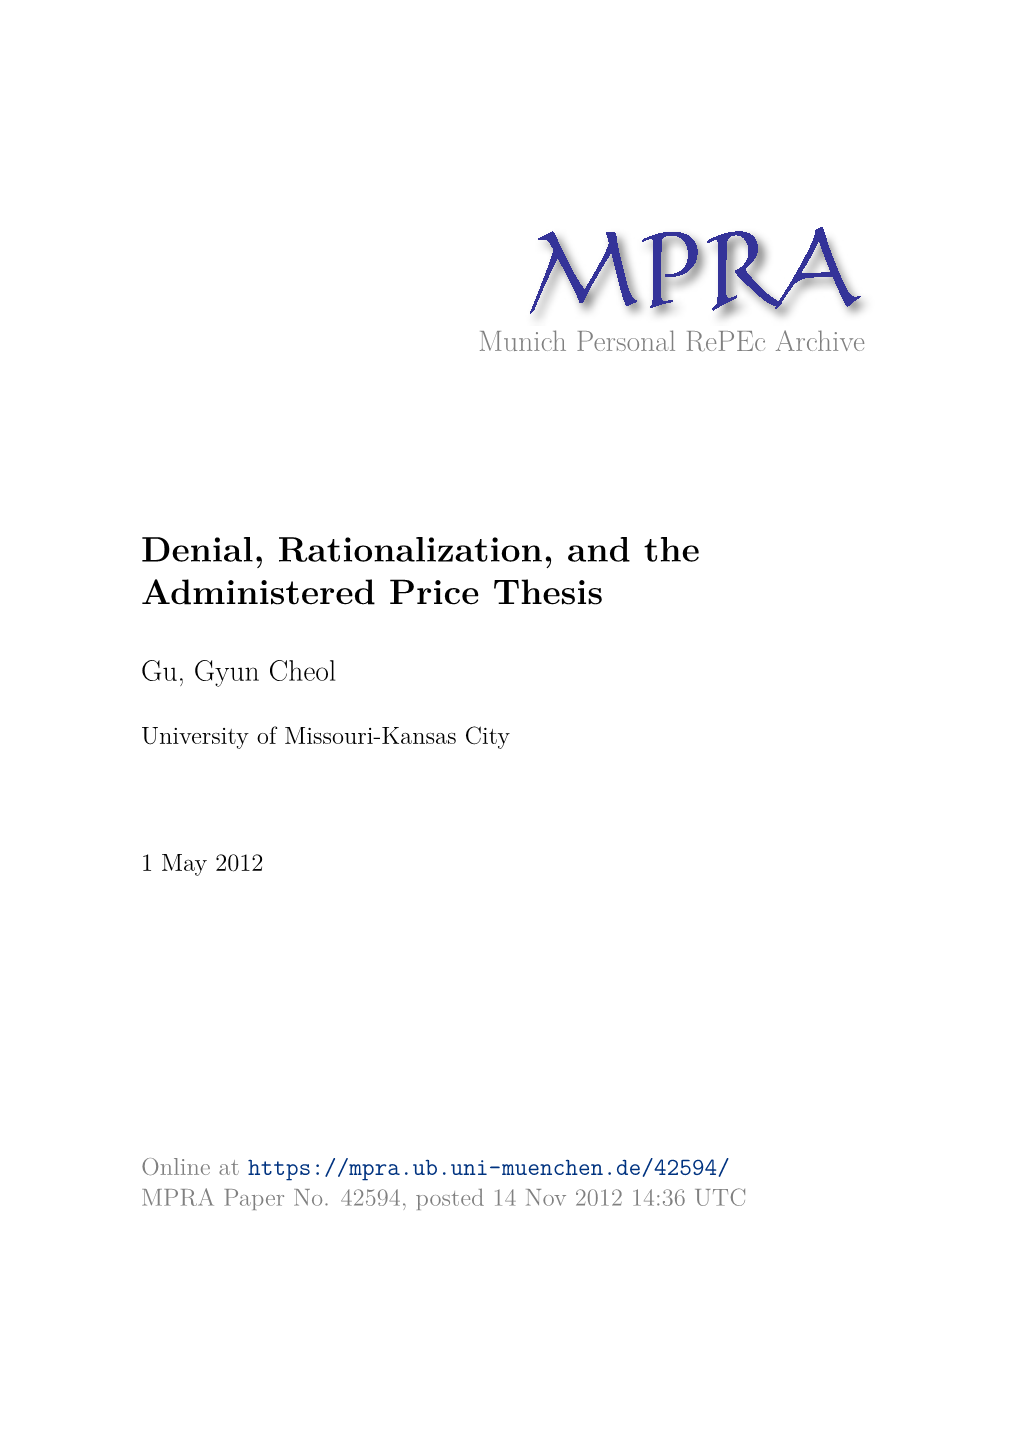 Denial, Rationalization, and the Administered Price Thesis